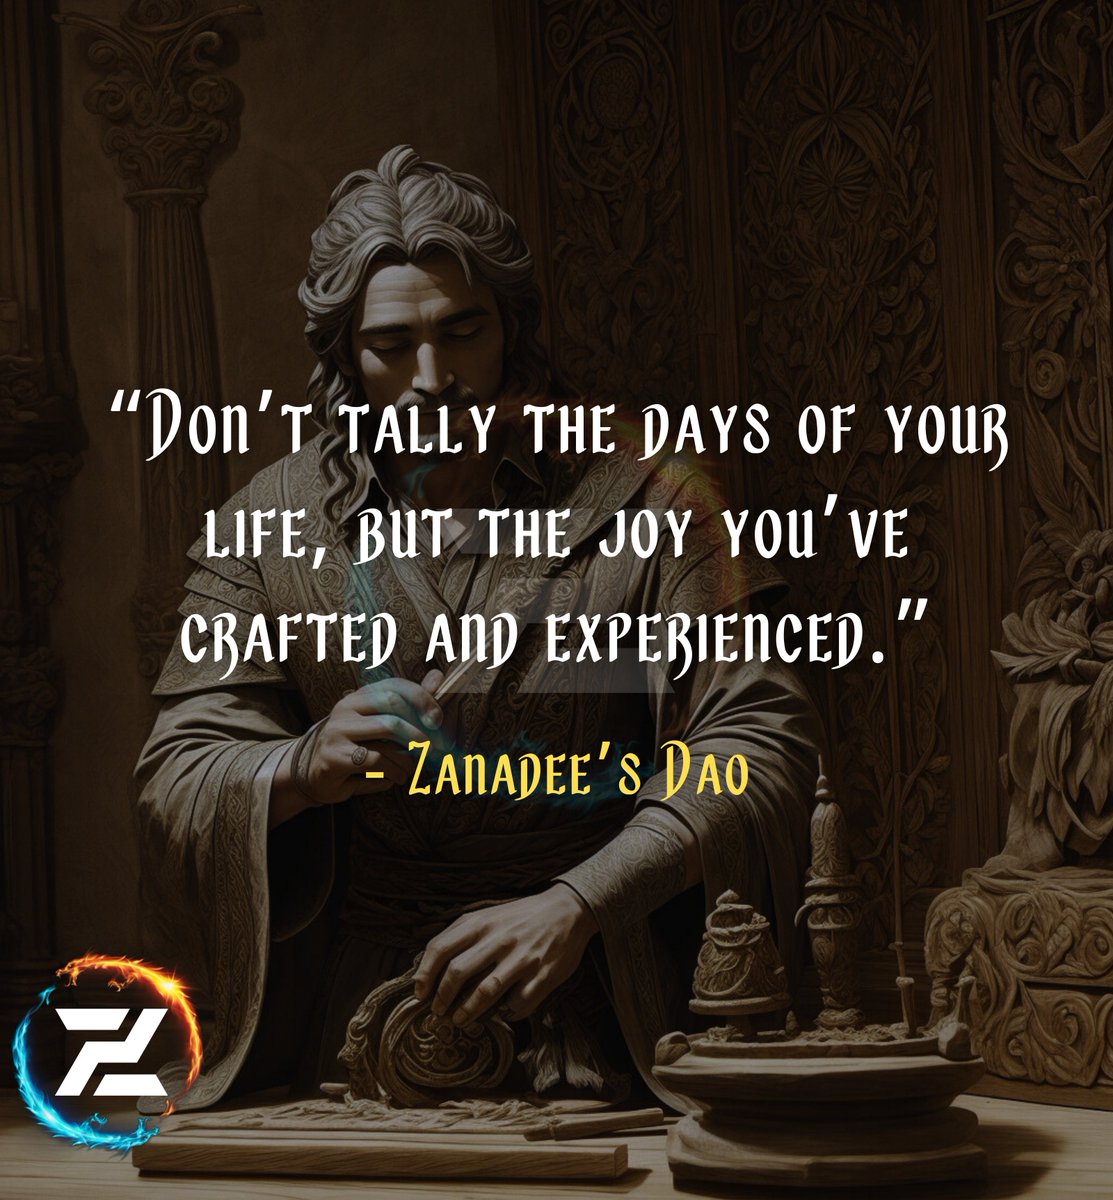 Joy’s Chronicle

“Don’t tally the days of your life, but the joy you’ve crafted and experienced.”

#Happiness #ExperienceJoy #SpiritualJourney #InnerStrength #Spirituality

Zanadee’s Dao